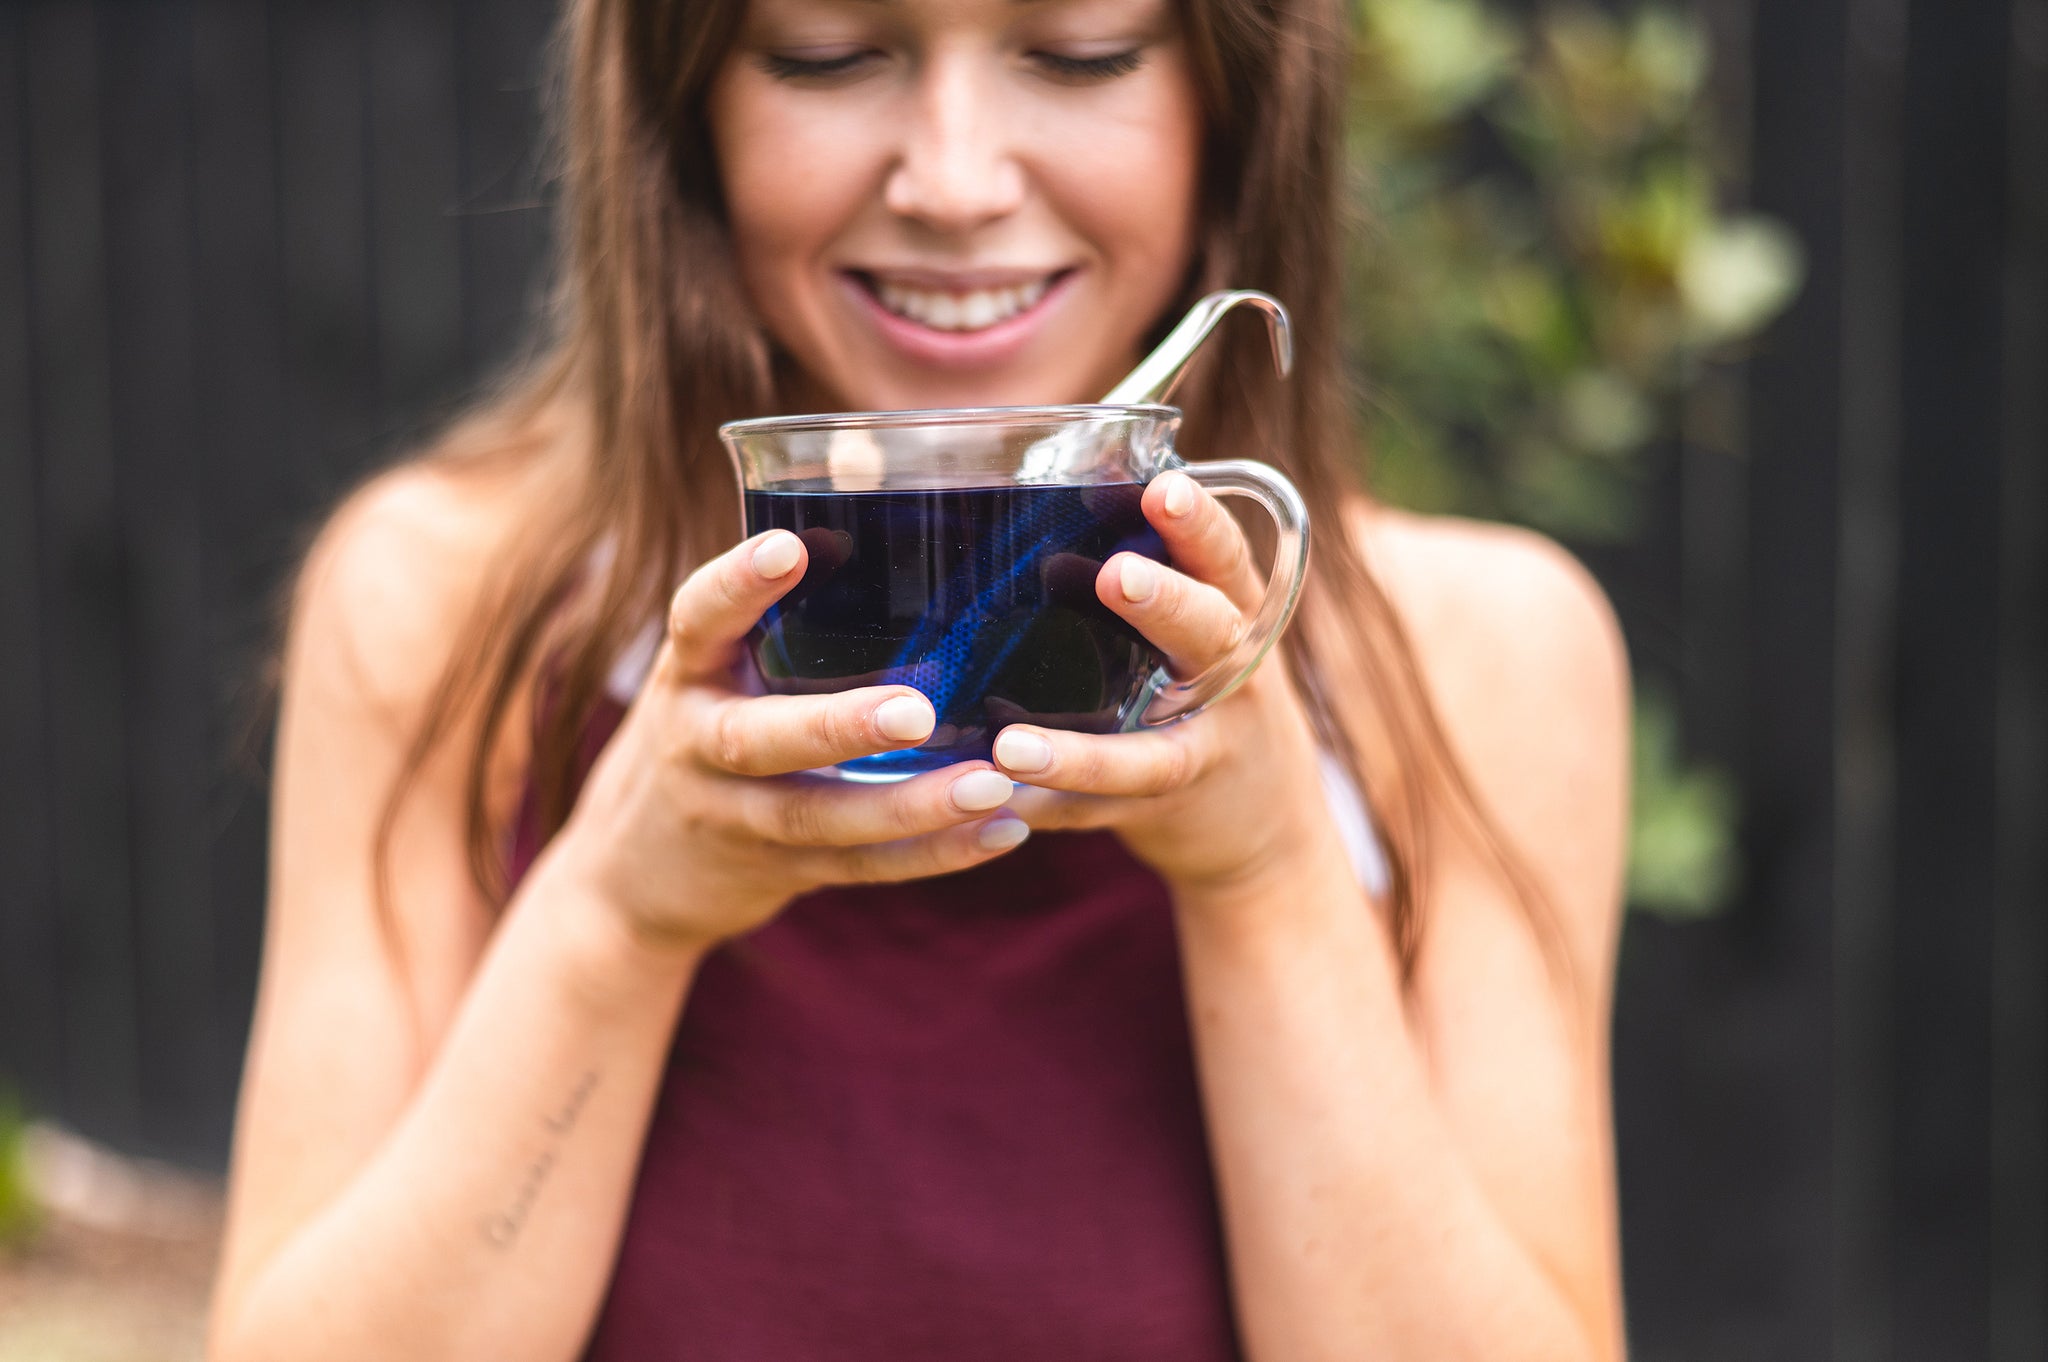 Woman holding a cup of tea with the Tea Infuser in the cup 